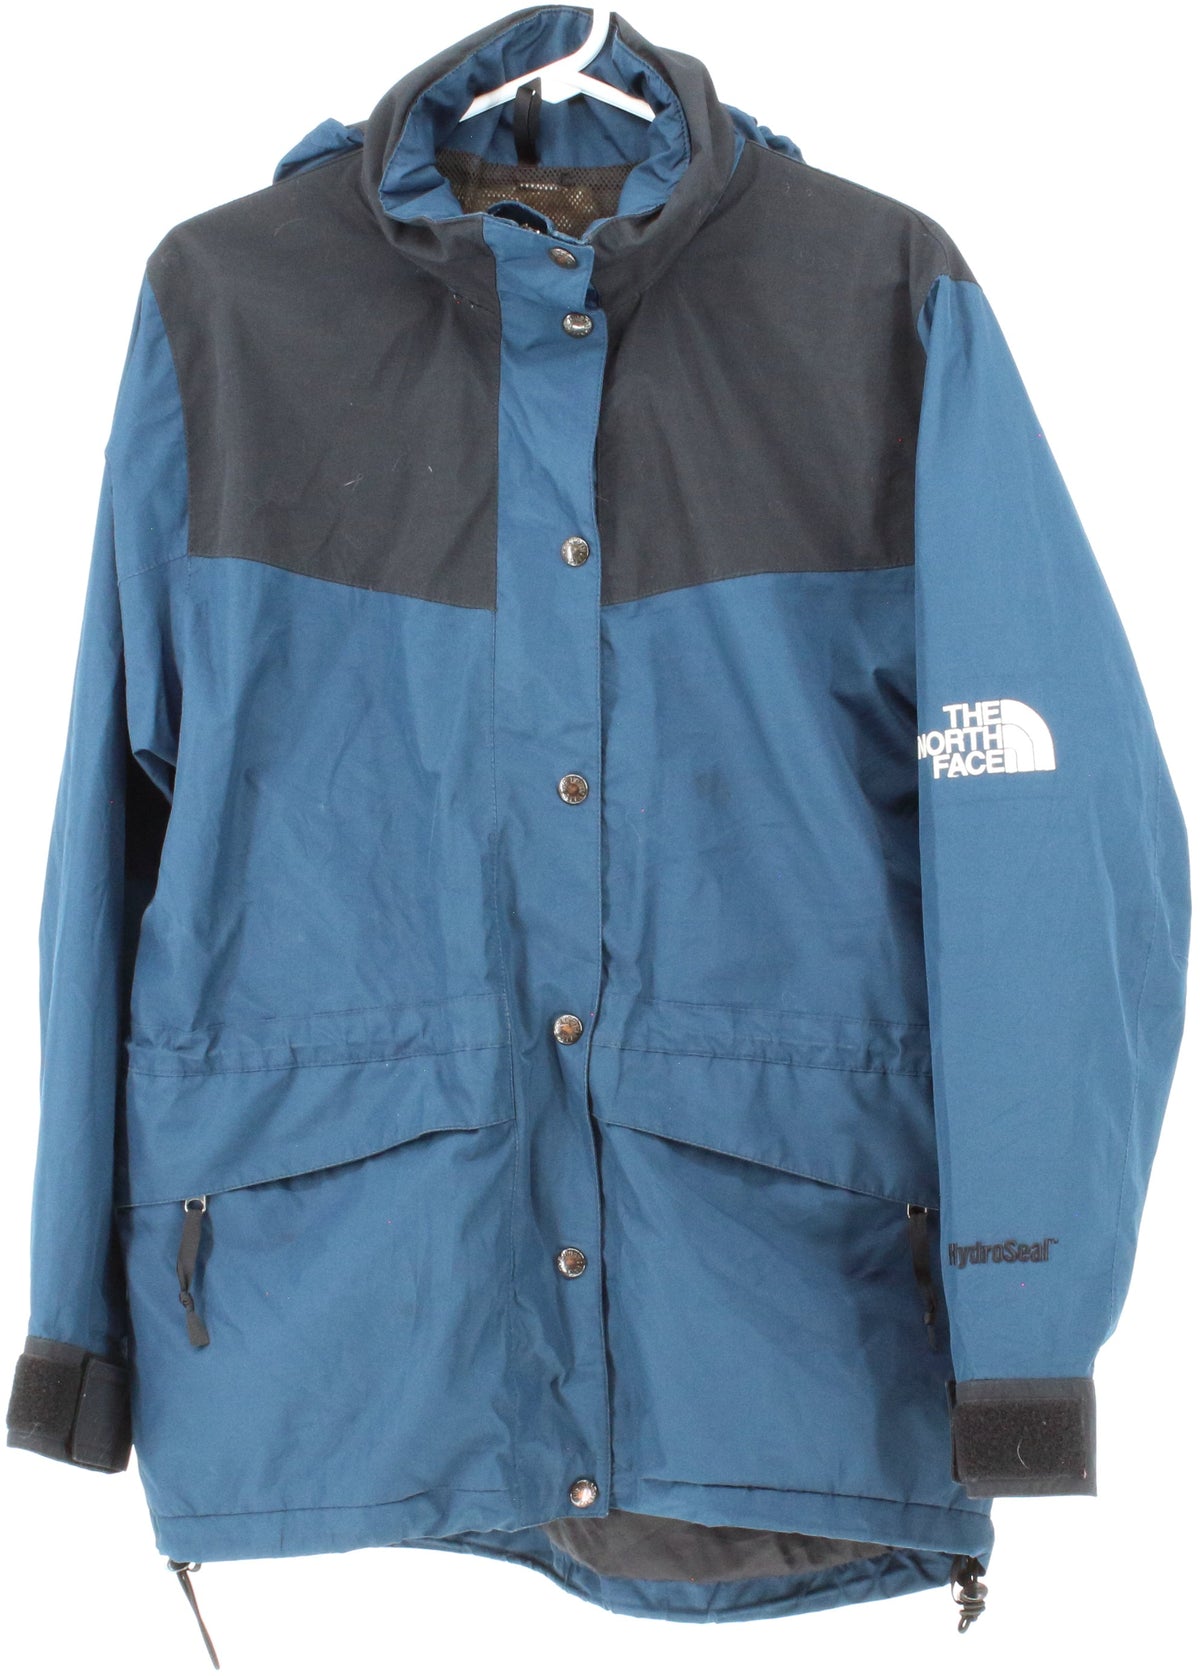 The North Face HydroSeal Blue and Black Hooded Women's Jacket